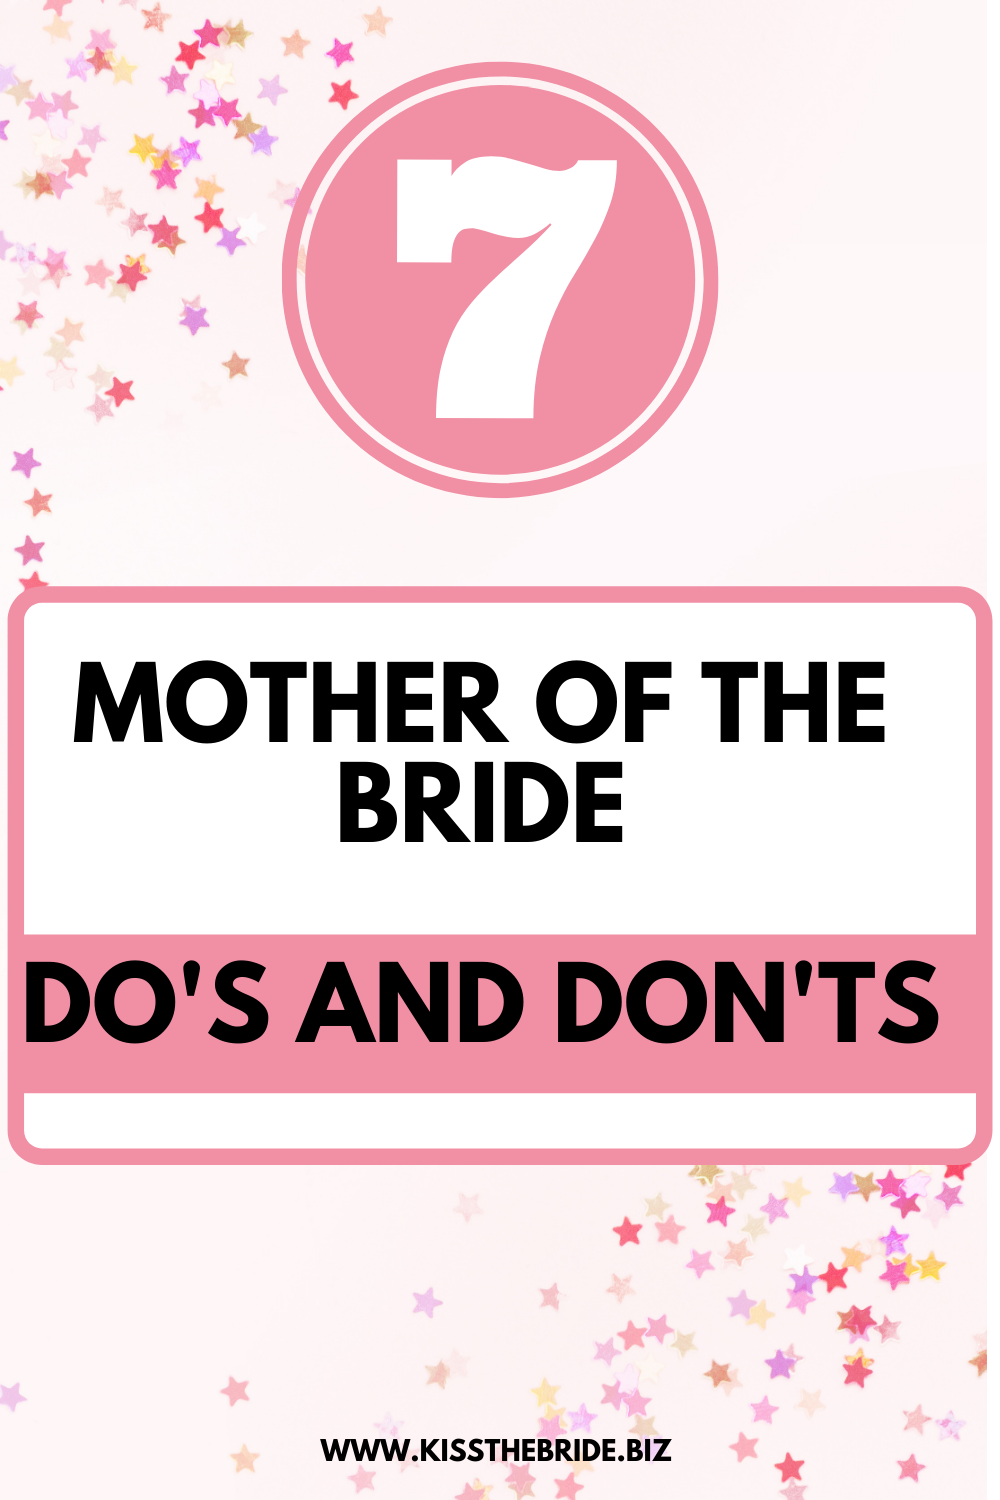 Mother of the Bride Tips